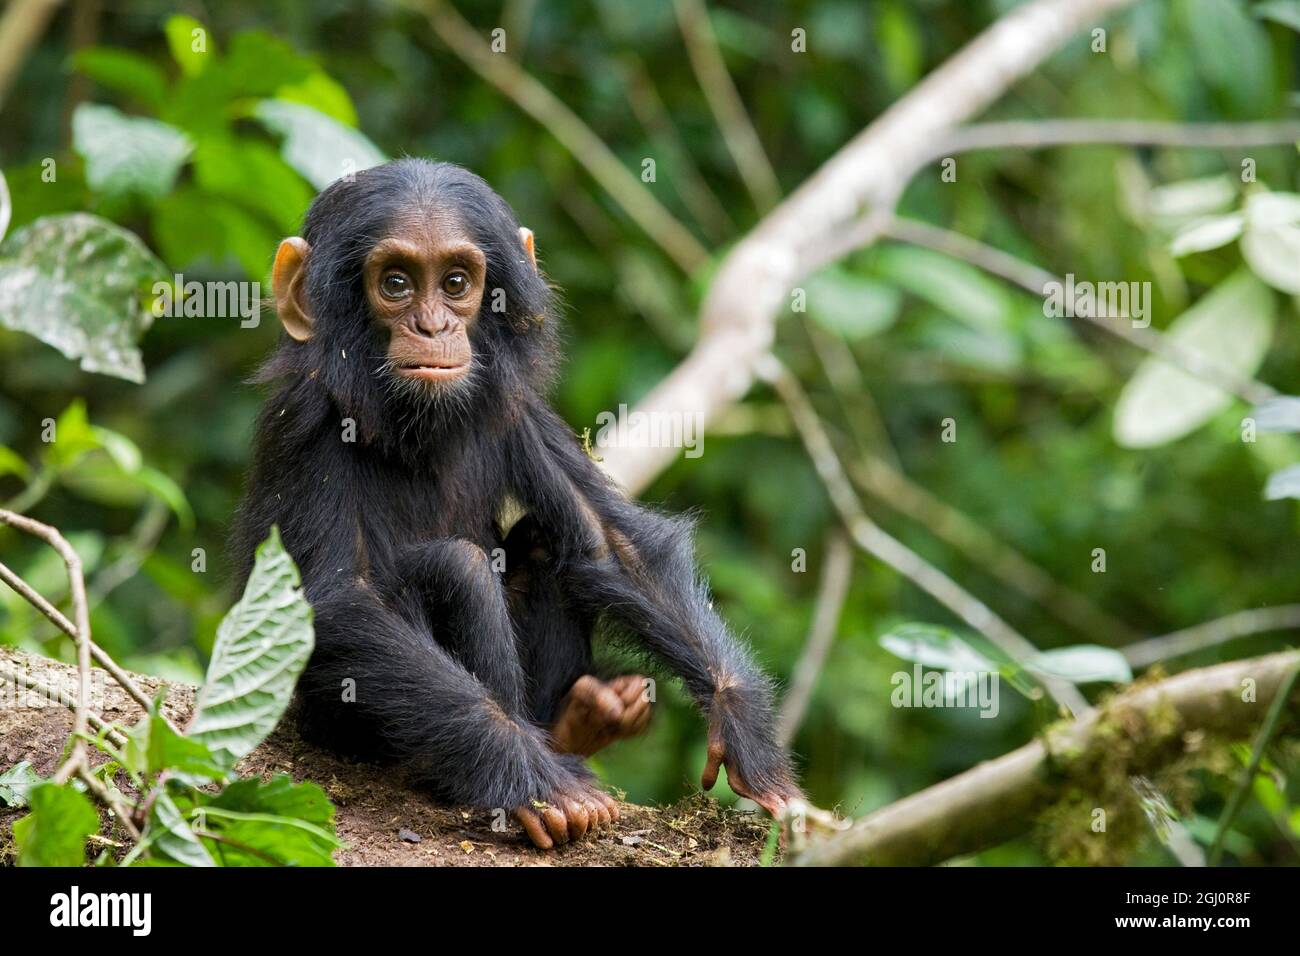 Africa, Uganda, Kibale National Park, Ngogo Chimpanzee Project. An infant chimpanzee pauses briefly during play. Stock Photo